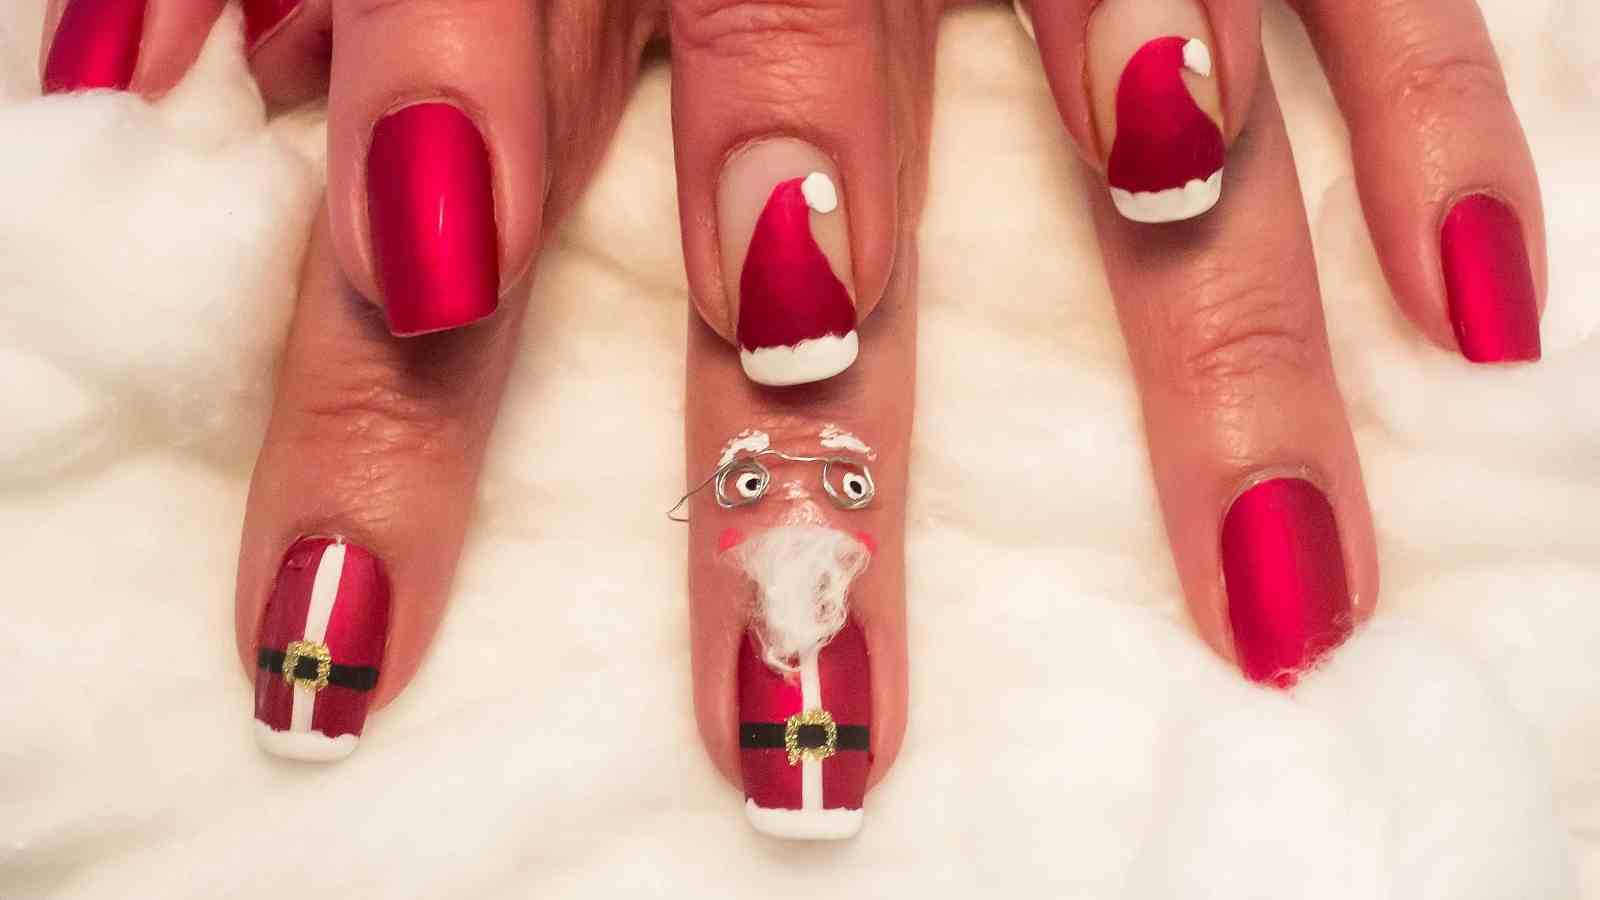 8. Christmas Nail Art with Reindeer and Santa Claus - wide 9